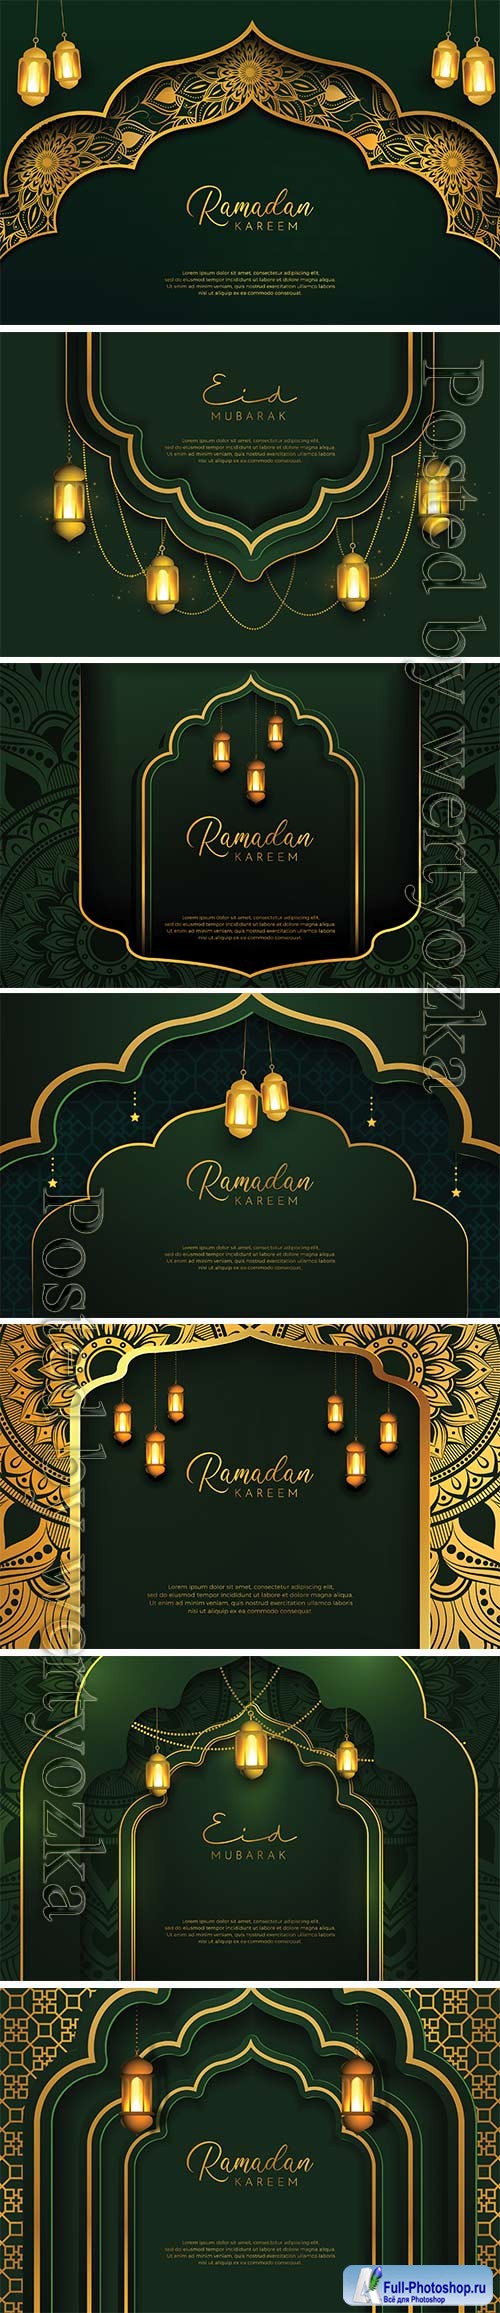 Ramadan Kareem background with gold and green color luxury style